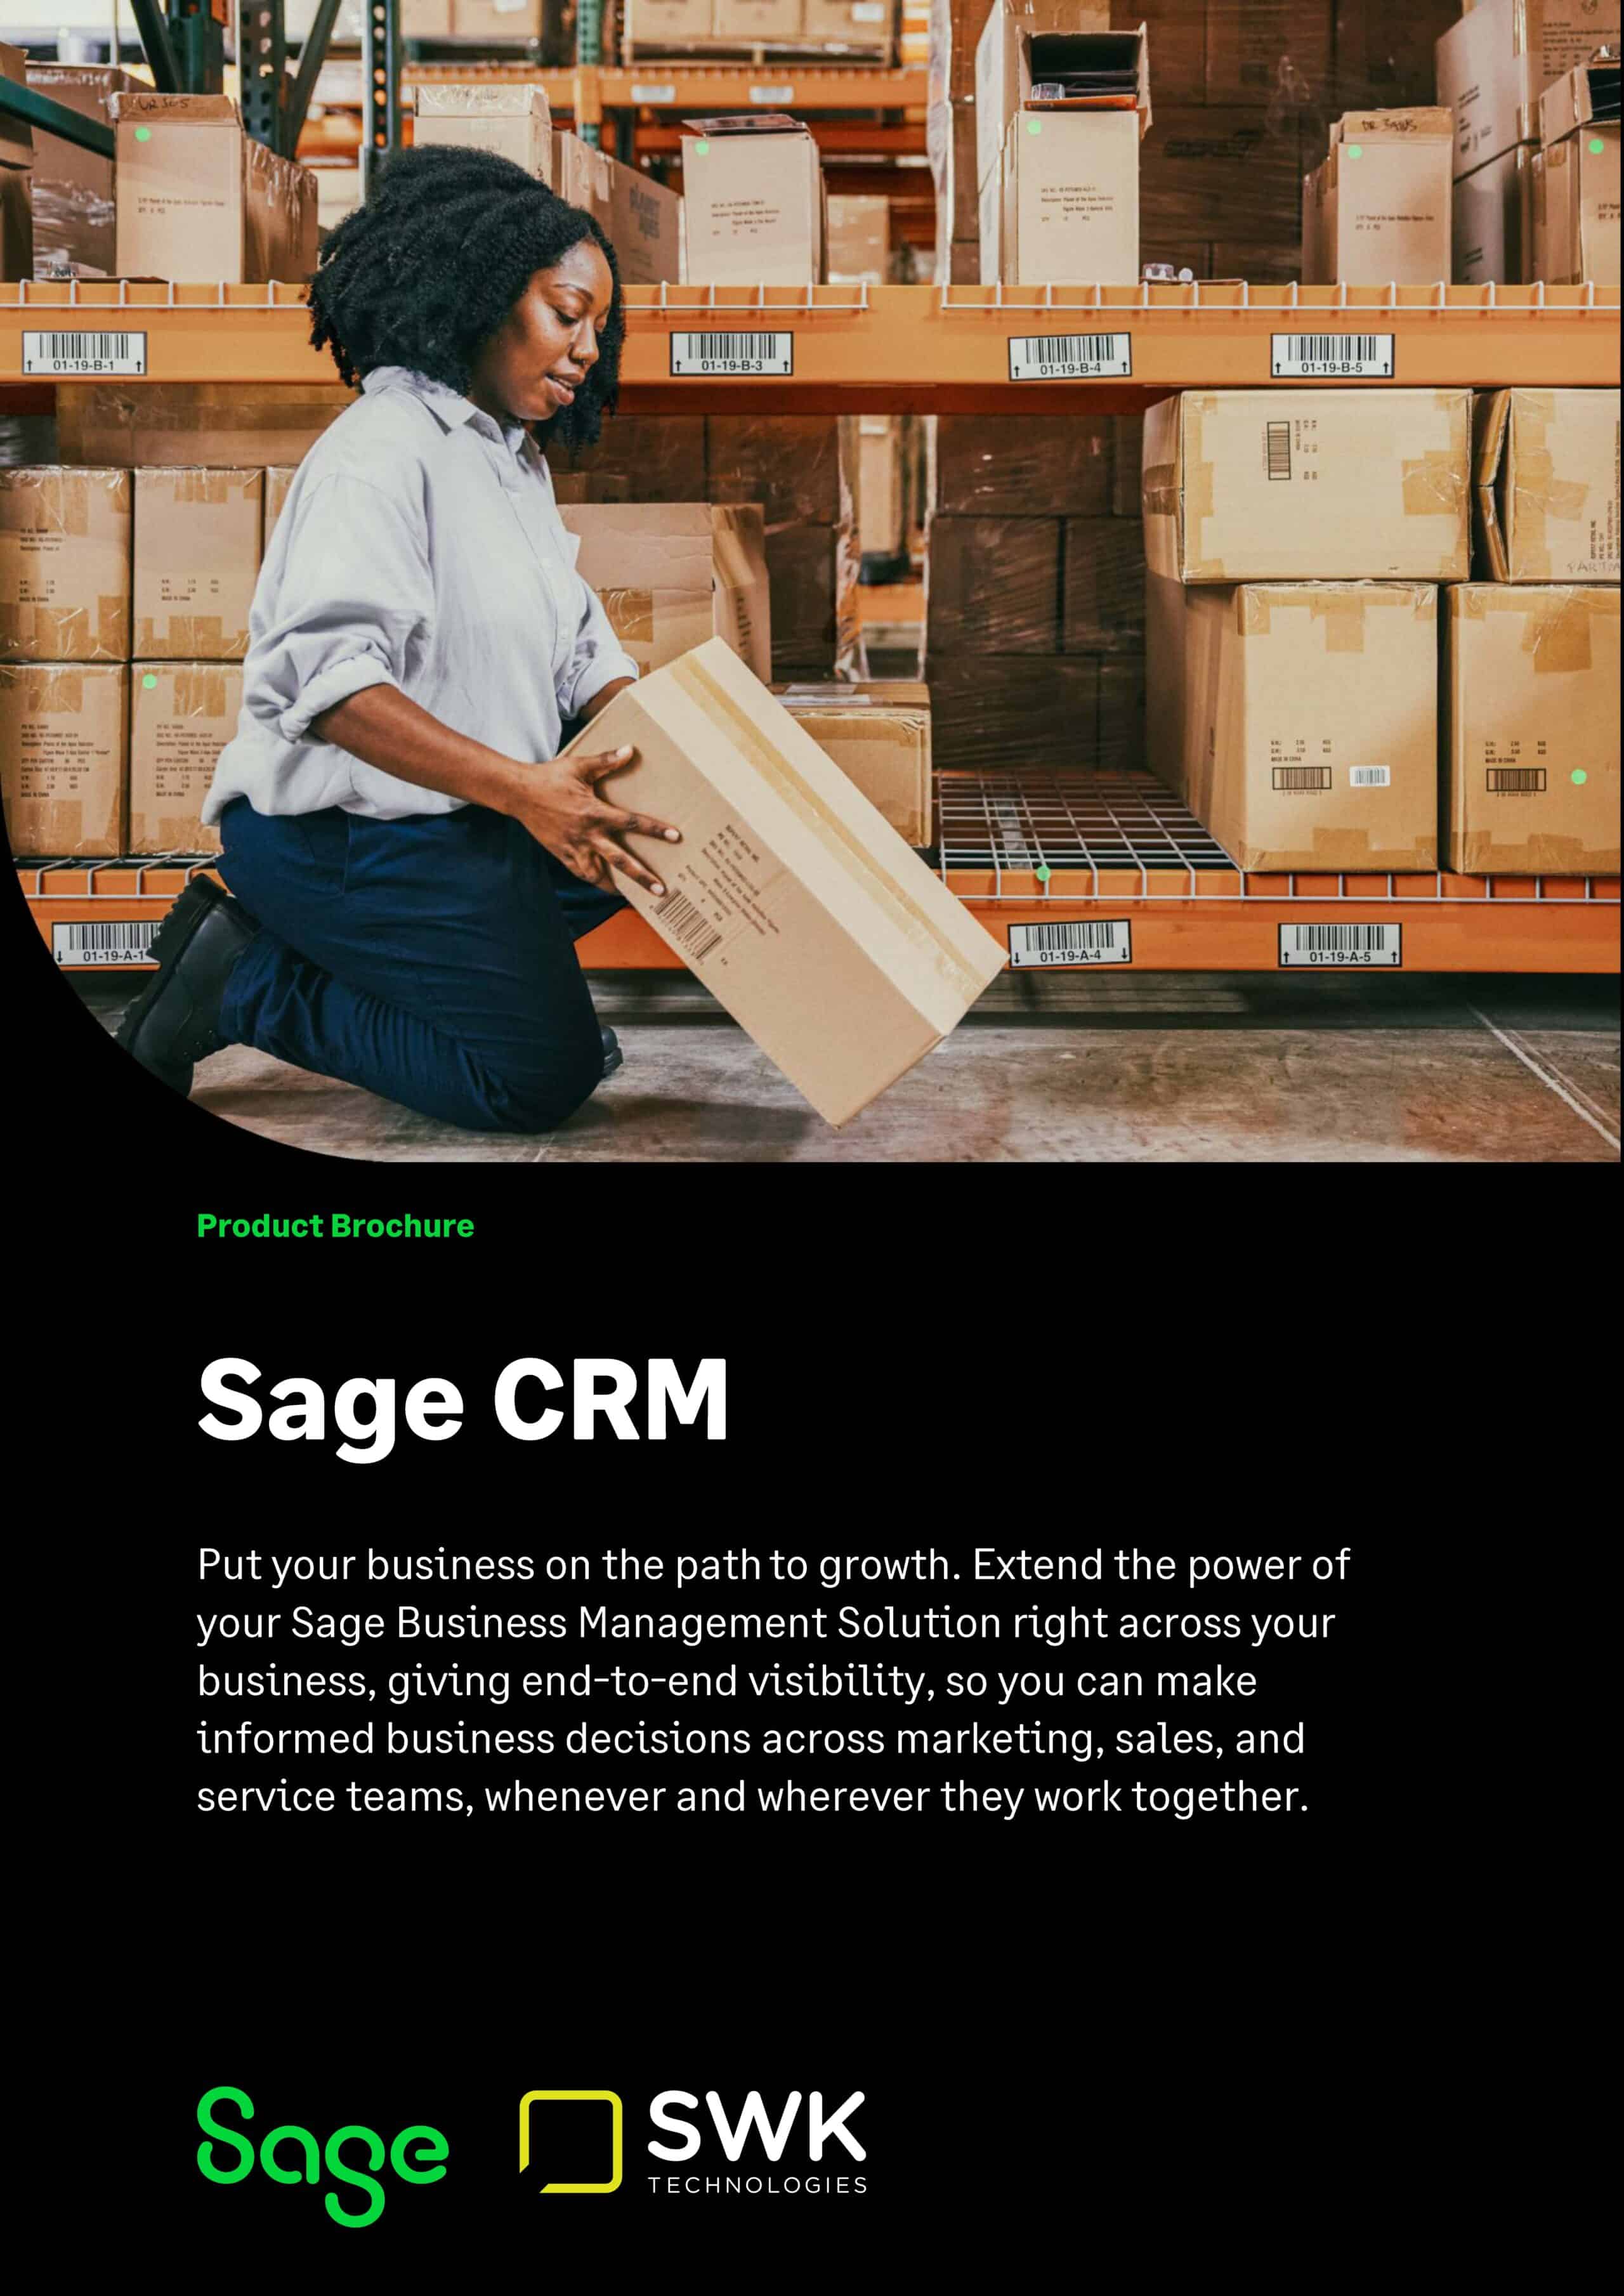 The cover of Sage CRM Product Brochure.